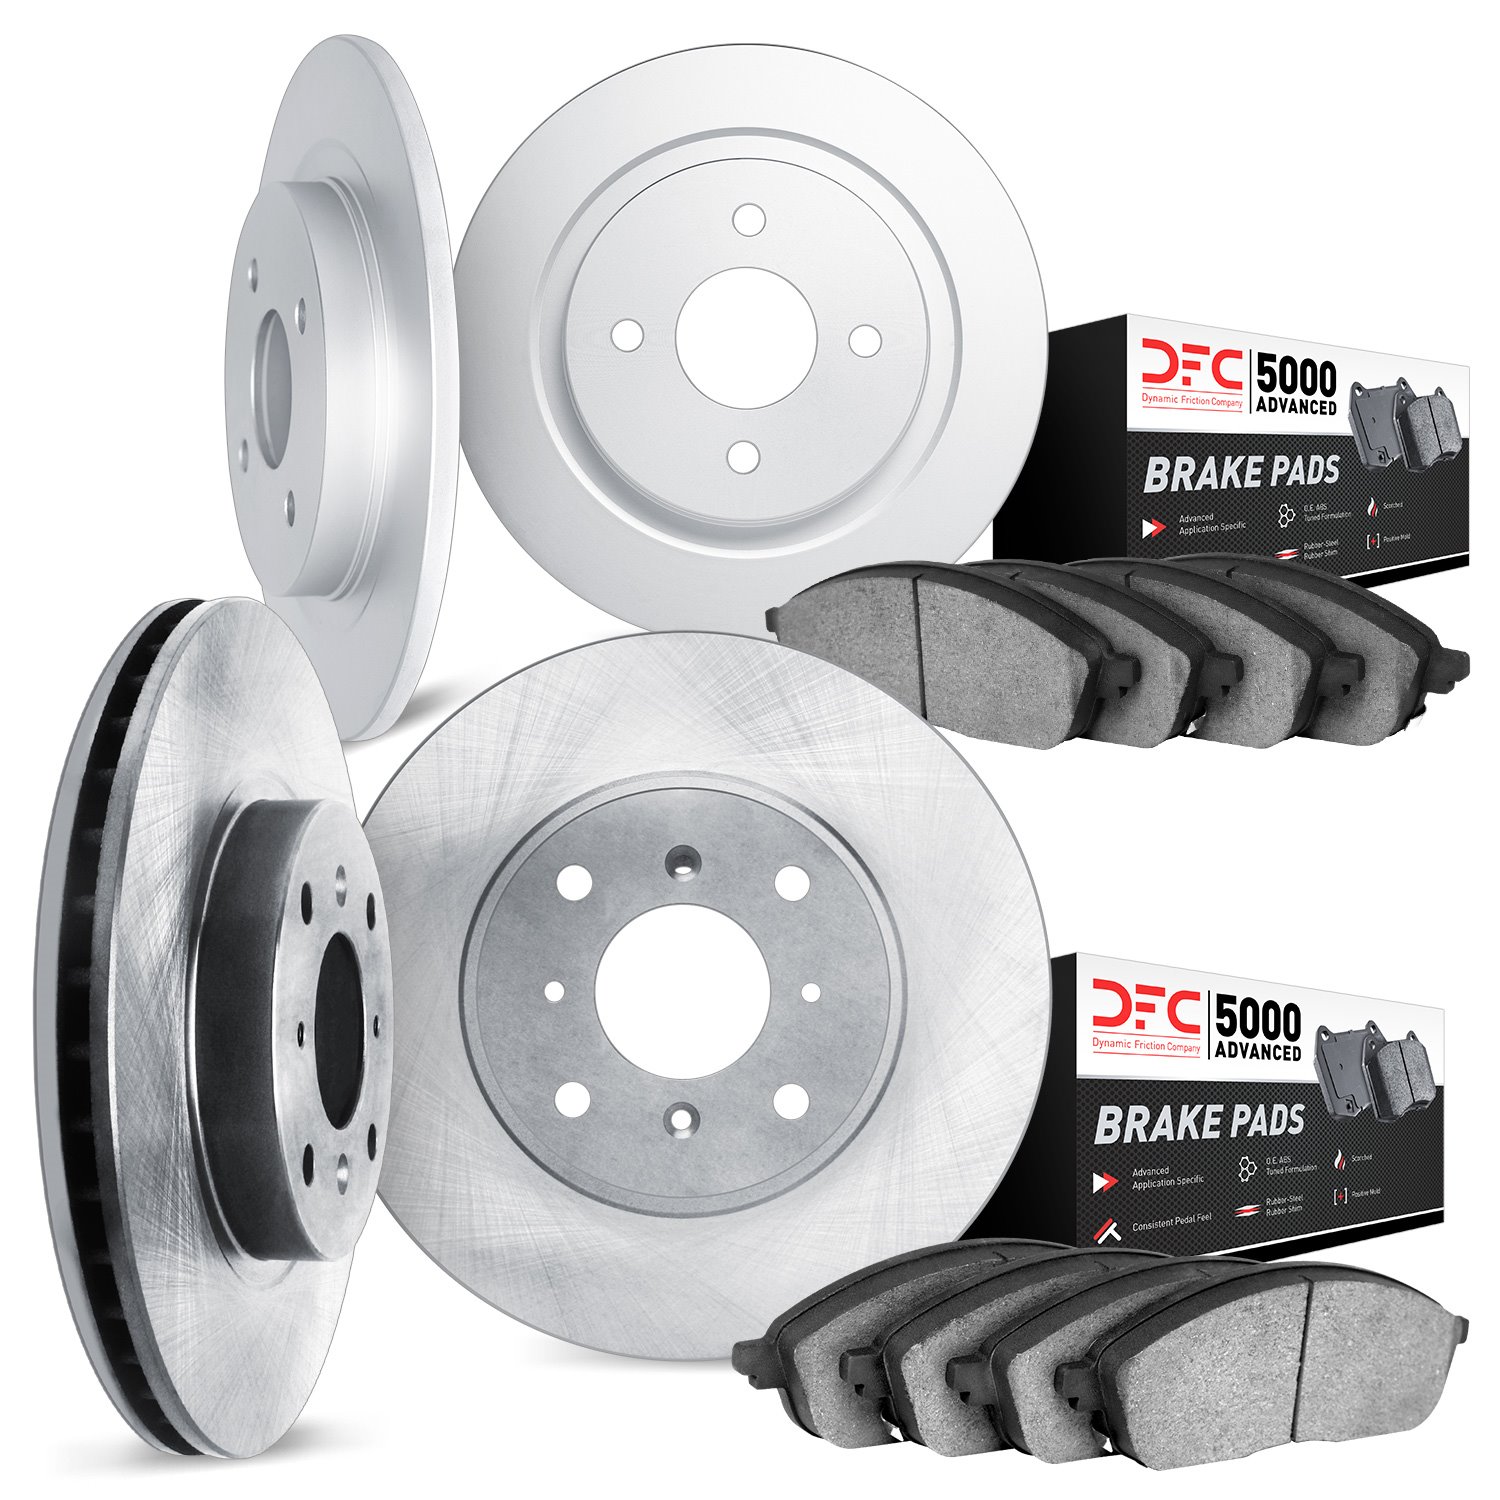 6504-28005 Brake Rotors w/5000 Advanced Brake Pads Kit, 1989-1991 Peugeot, Position: Front and Rear